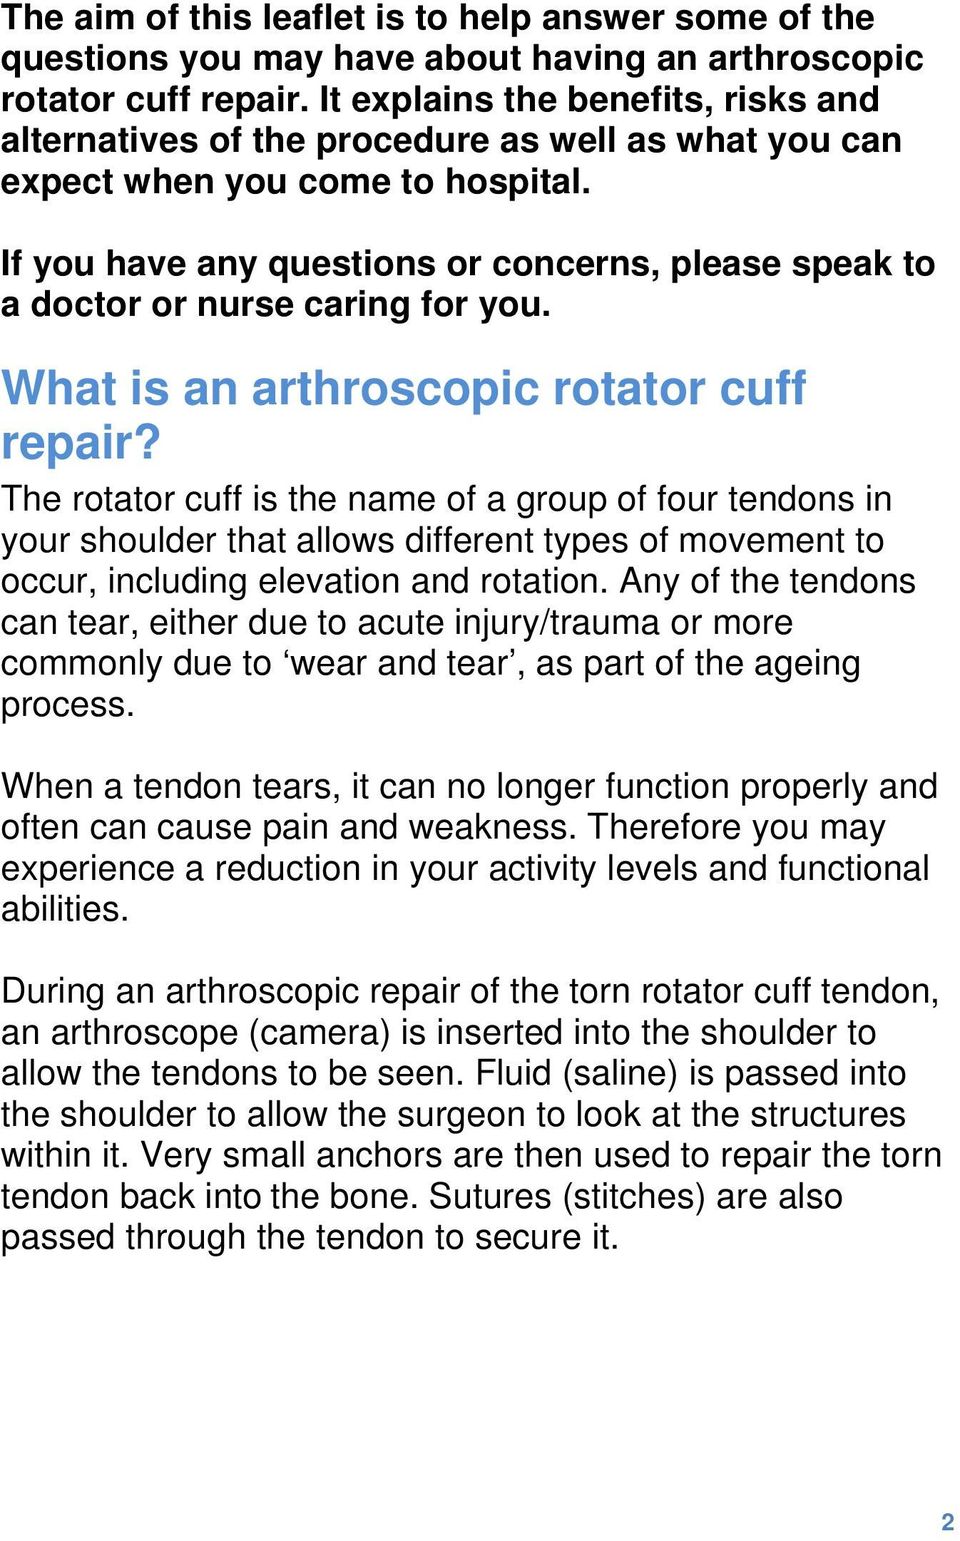 If you have any questions or concerns, please speak to a doctor or nurse caring for you. What is an arthroscopic rotator cuff repair?